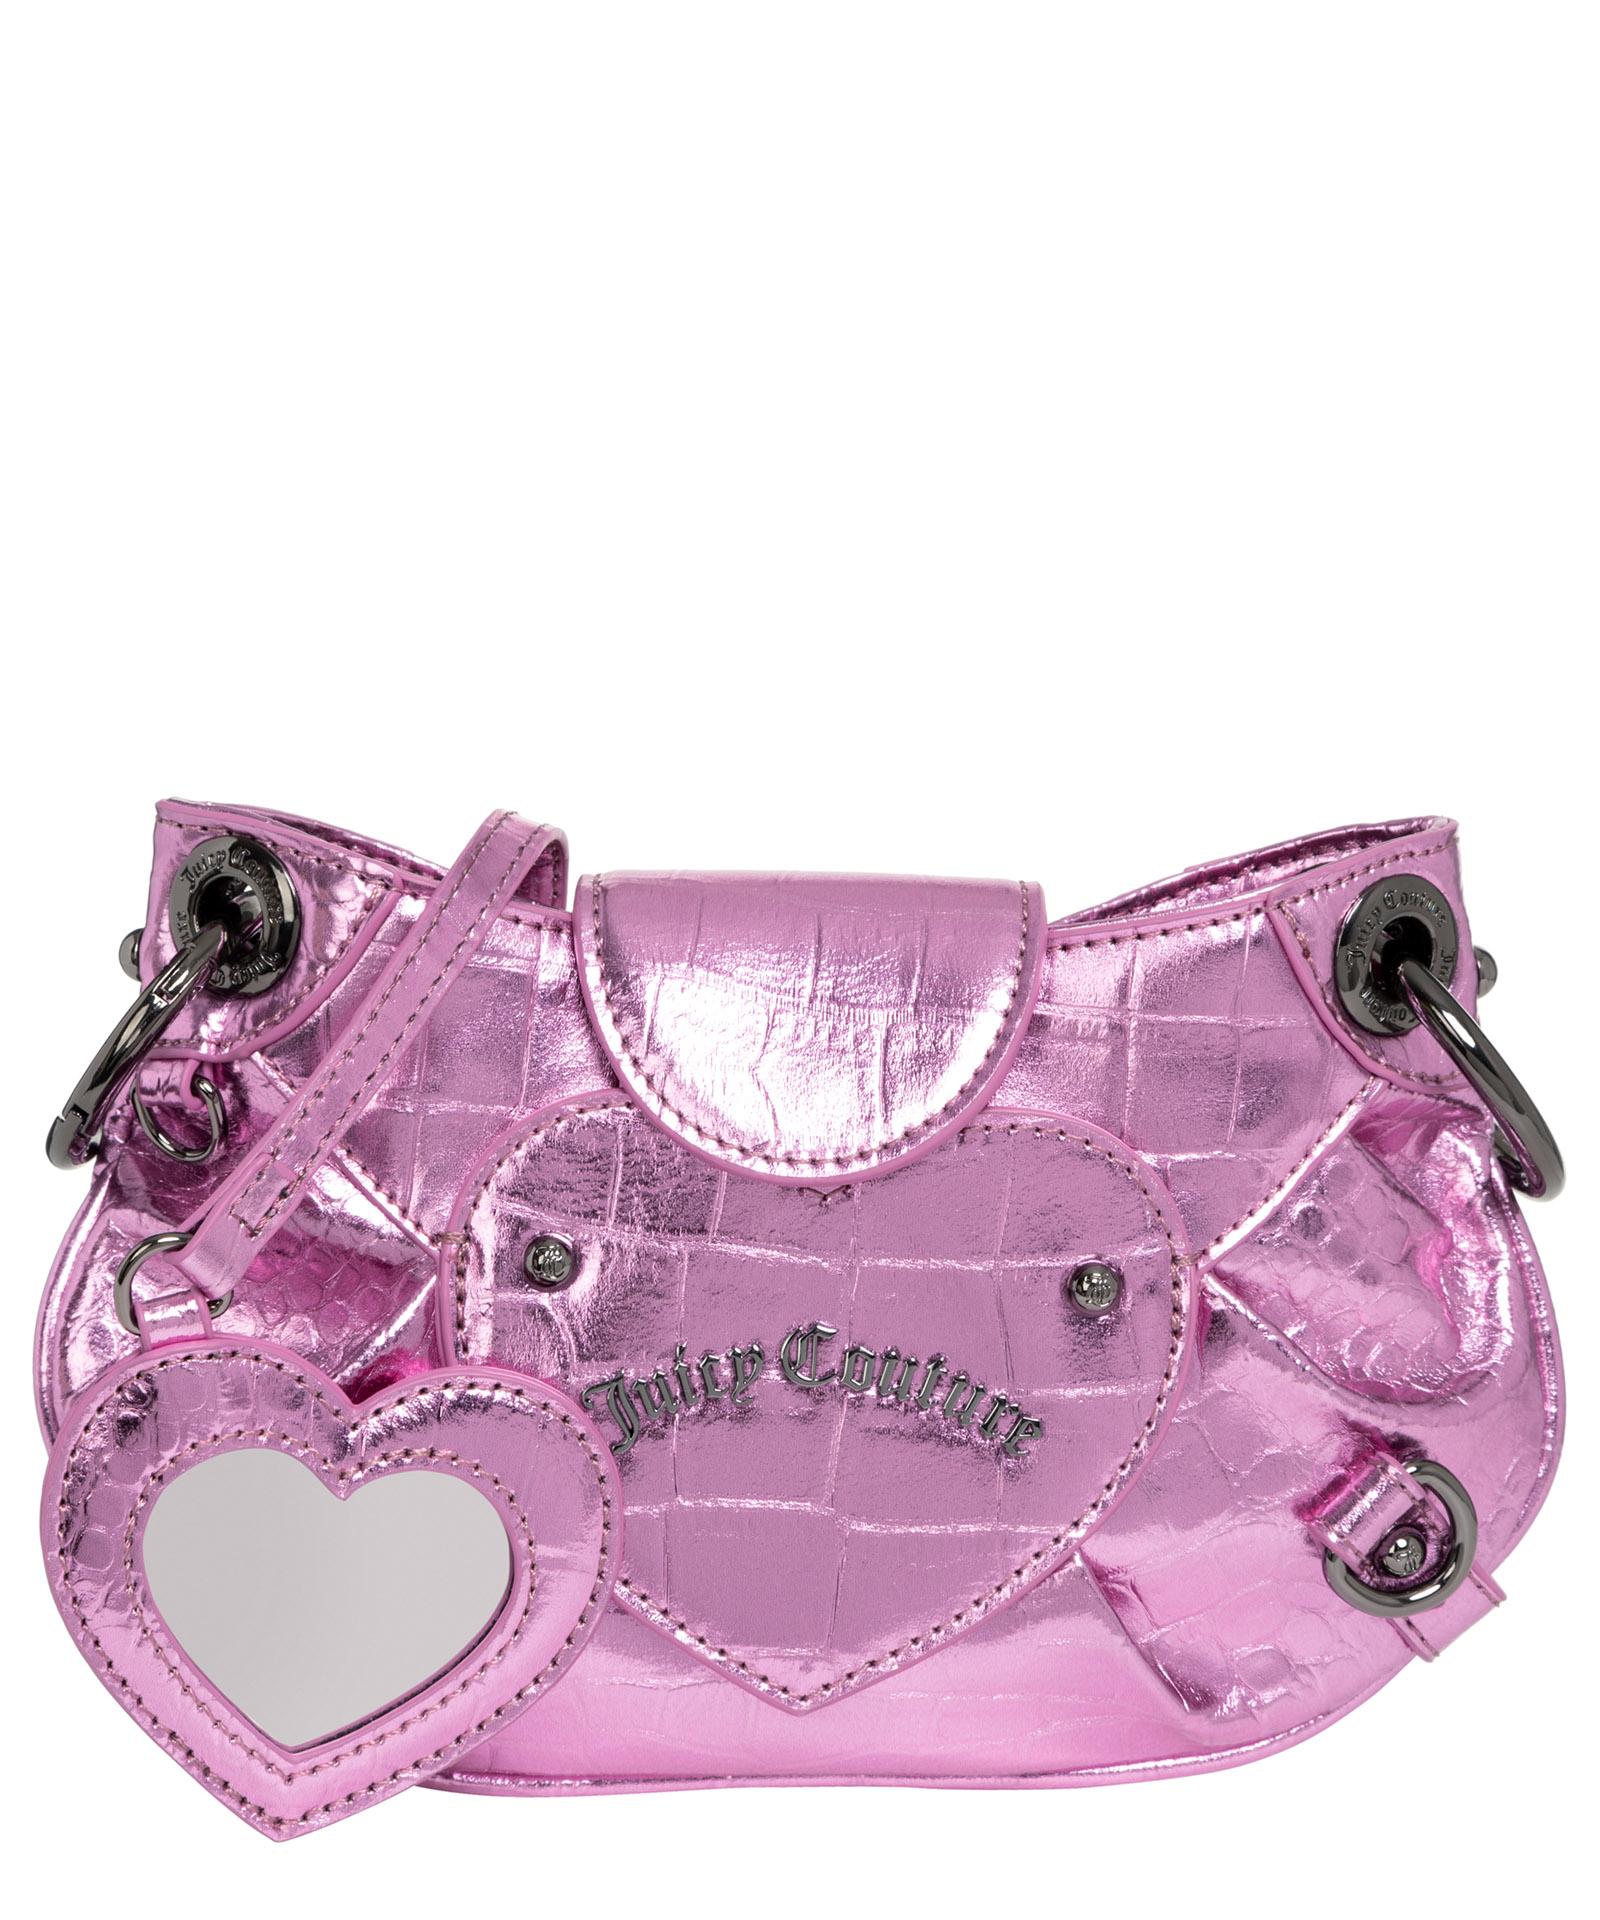 With God, All Things Are Possible Handbag With Adjustable Shoulder Strap  Featuring Pebbled Faux Leather And A Charm